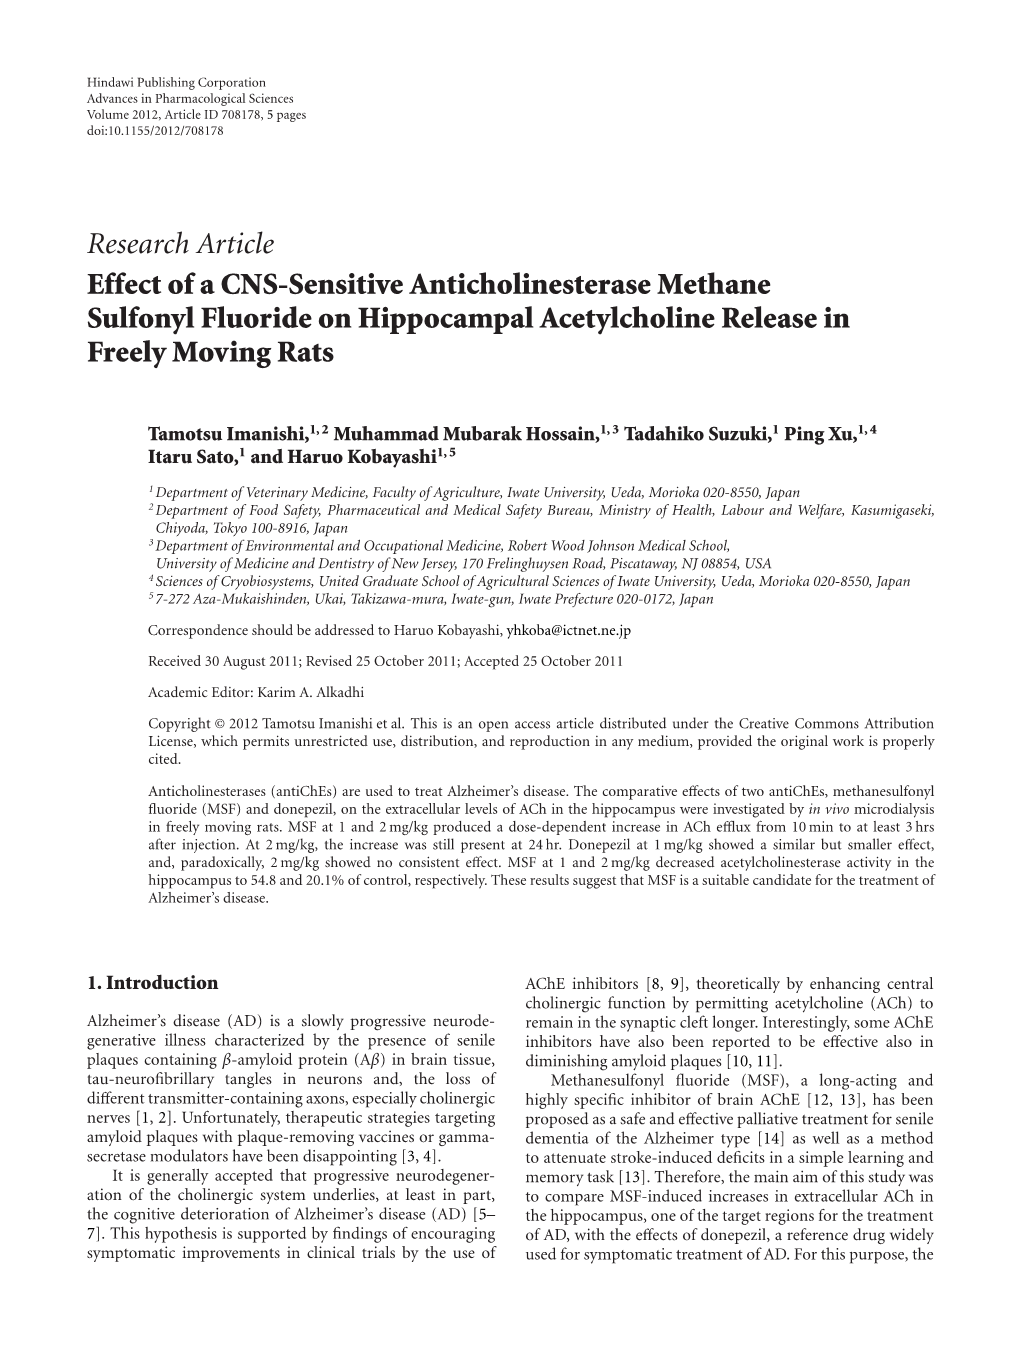 Effect of a CNS-Sensitive Anticholinesterase Methane Sulfonyl Fluoride on Hippocampal Acetylcholine Release in Freely Moving Rats